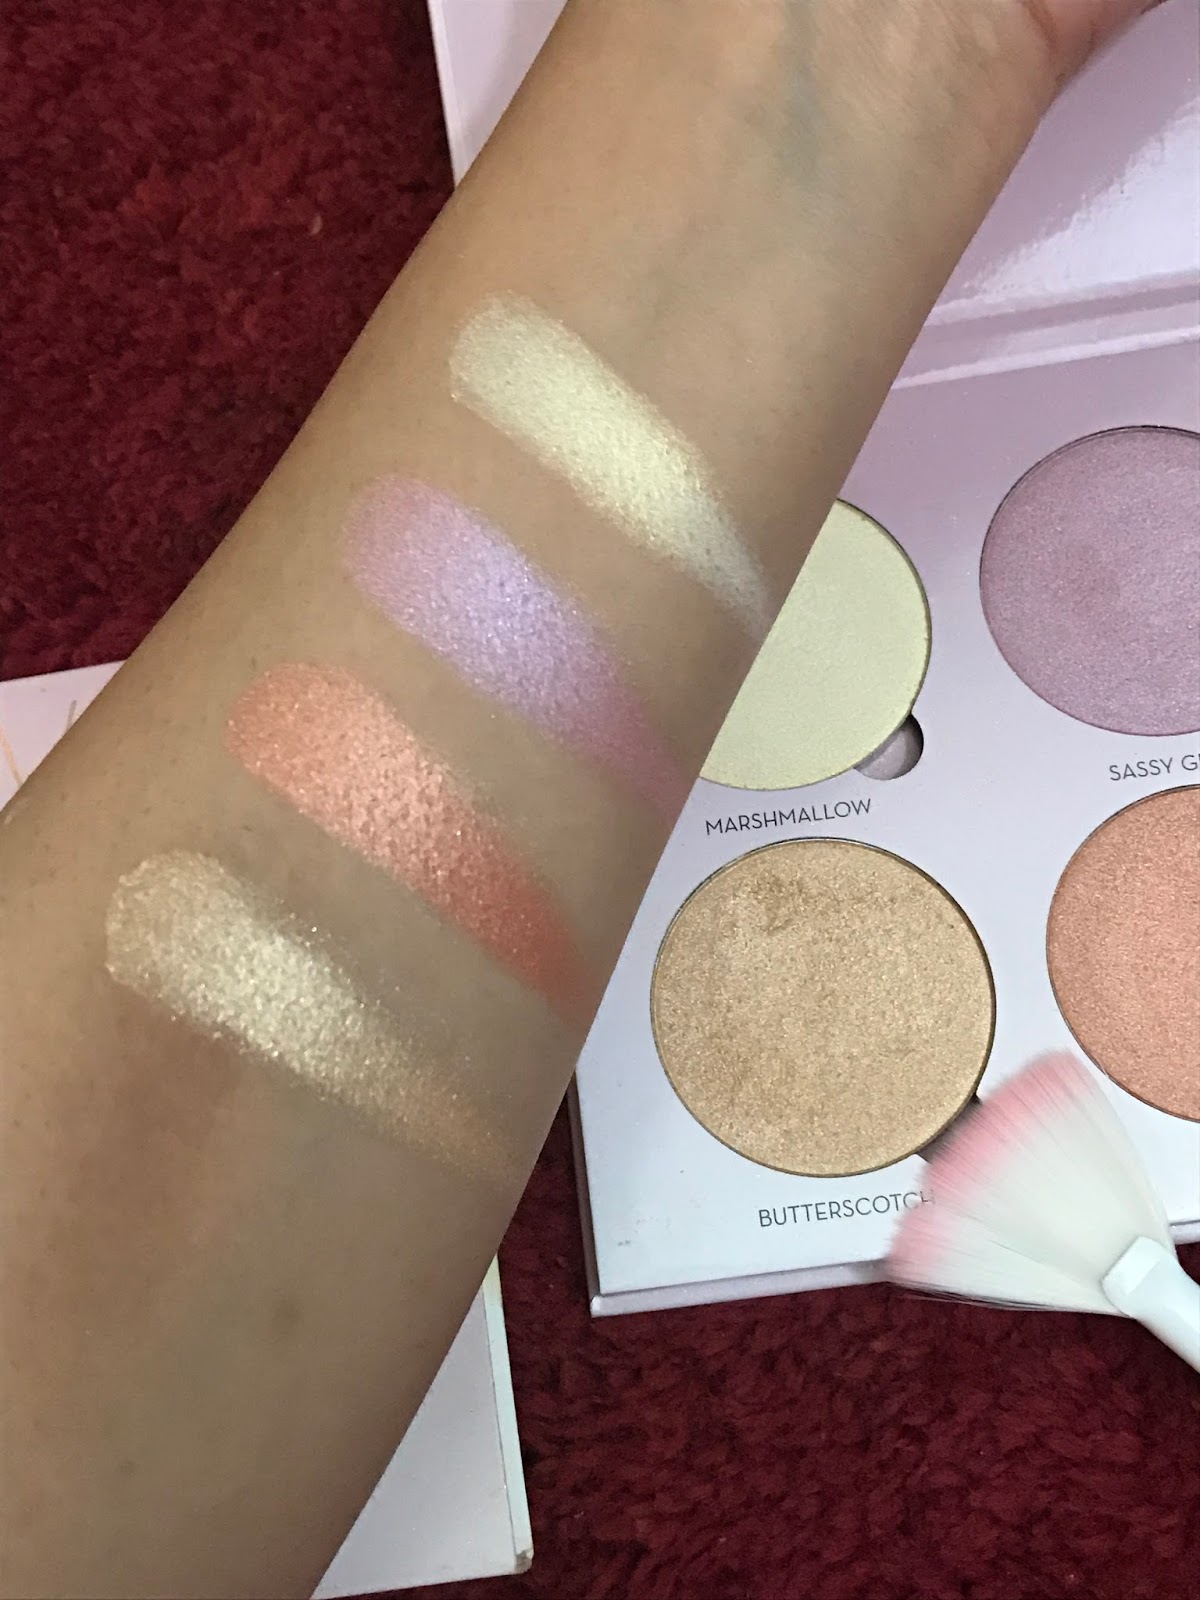 BEAUTY BY Anastasia Beverly Hills Glow Kit - Review Swatches